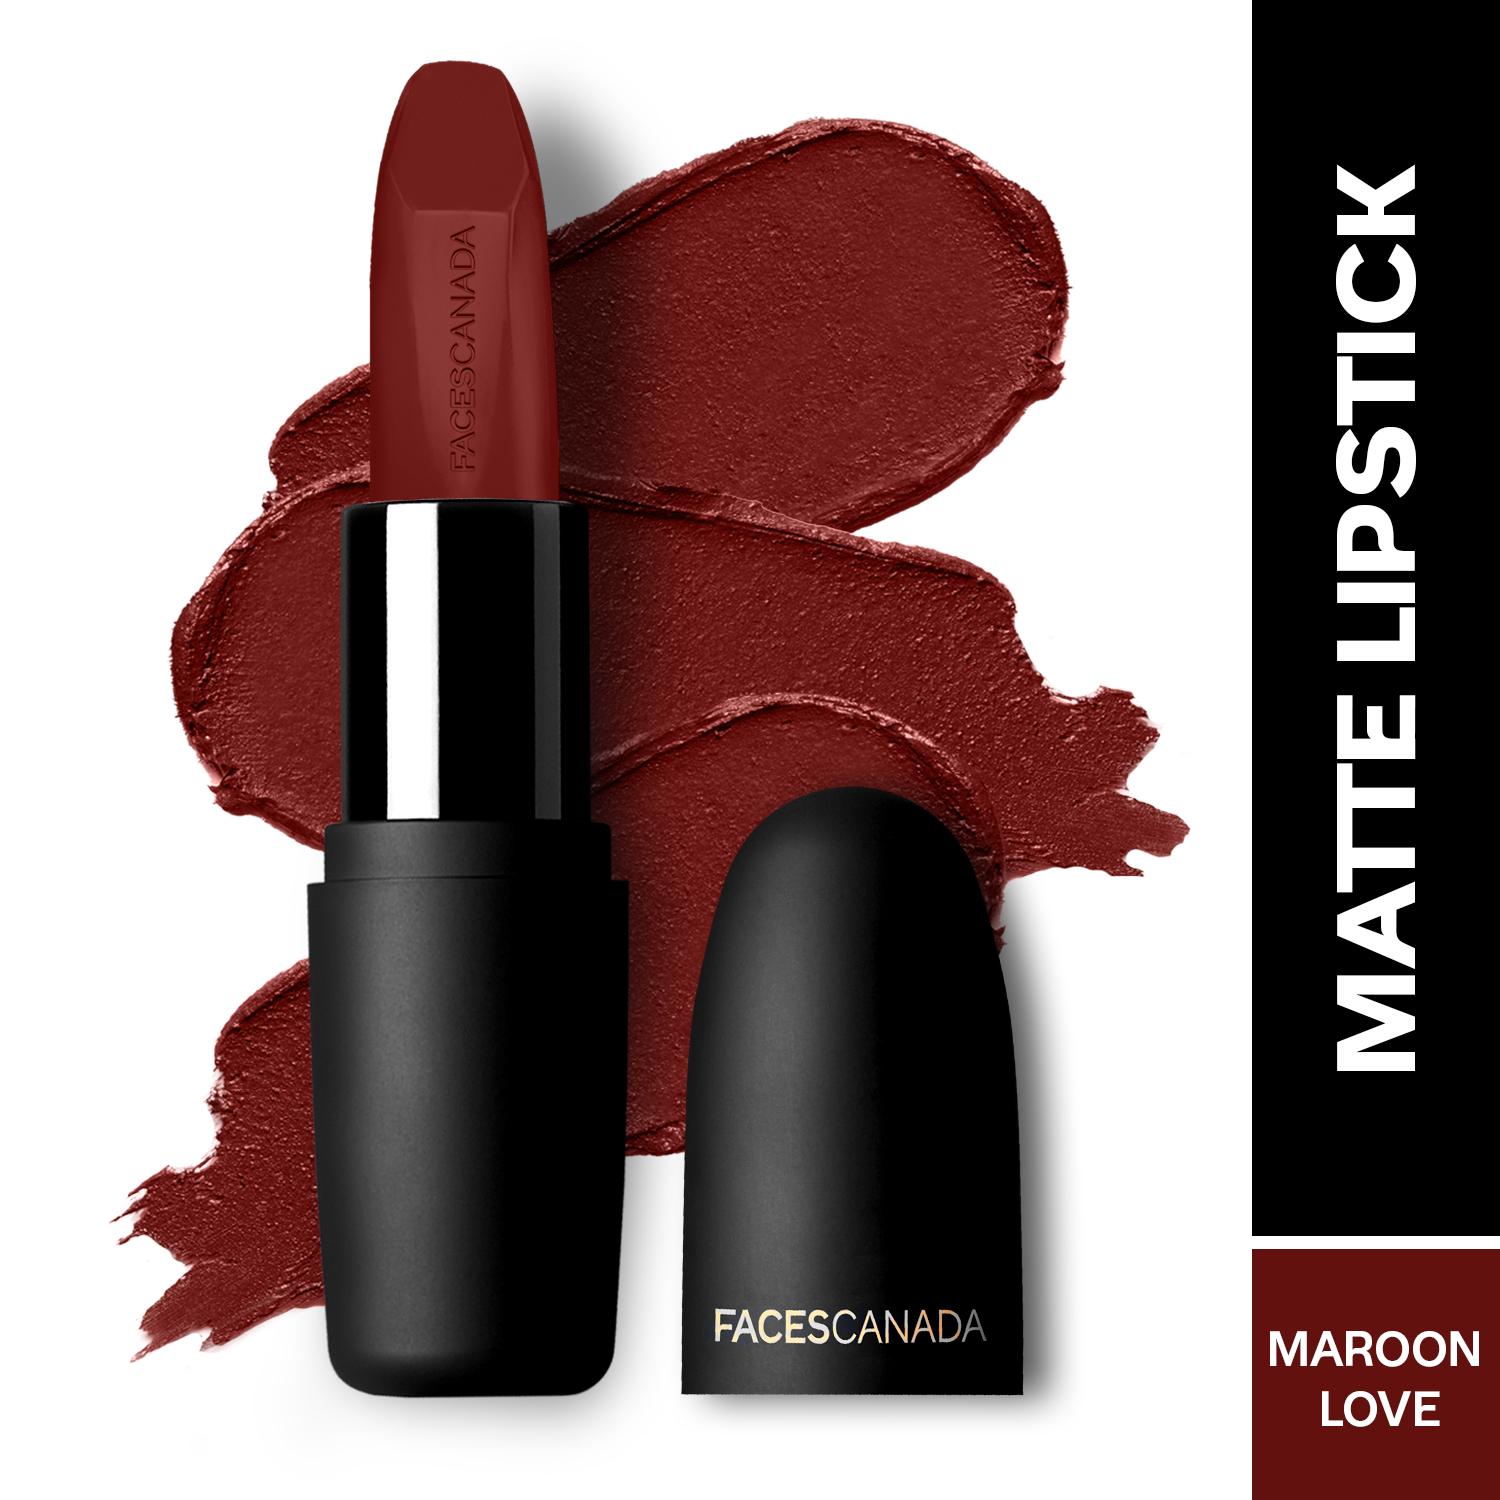 Faces Canada | Faces Canada Weightless Matte Lipstick, Pigmented and Hydrated Lips - Maroon Love 06 (4.5 g)